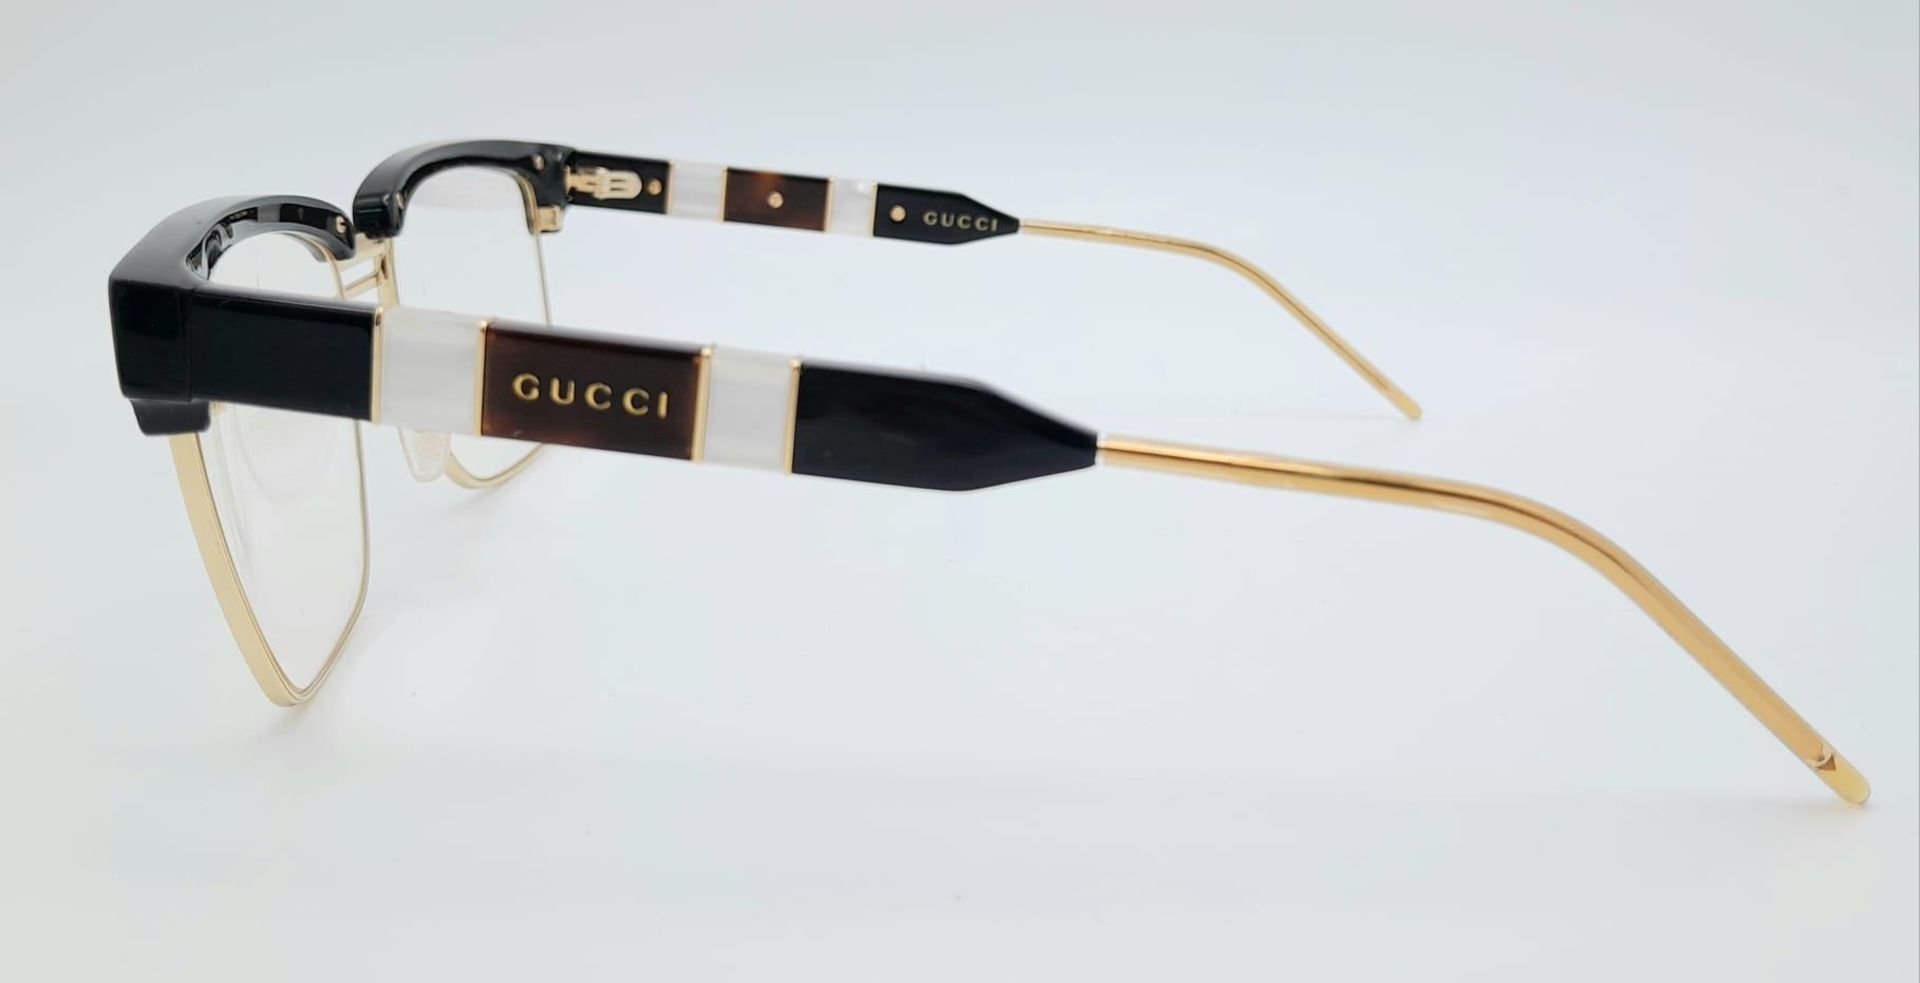 A GUCCI pair of glasses, gold plated in parts with mother of pearl highlights. Very stylish! - Image 3 of 5